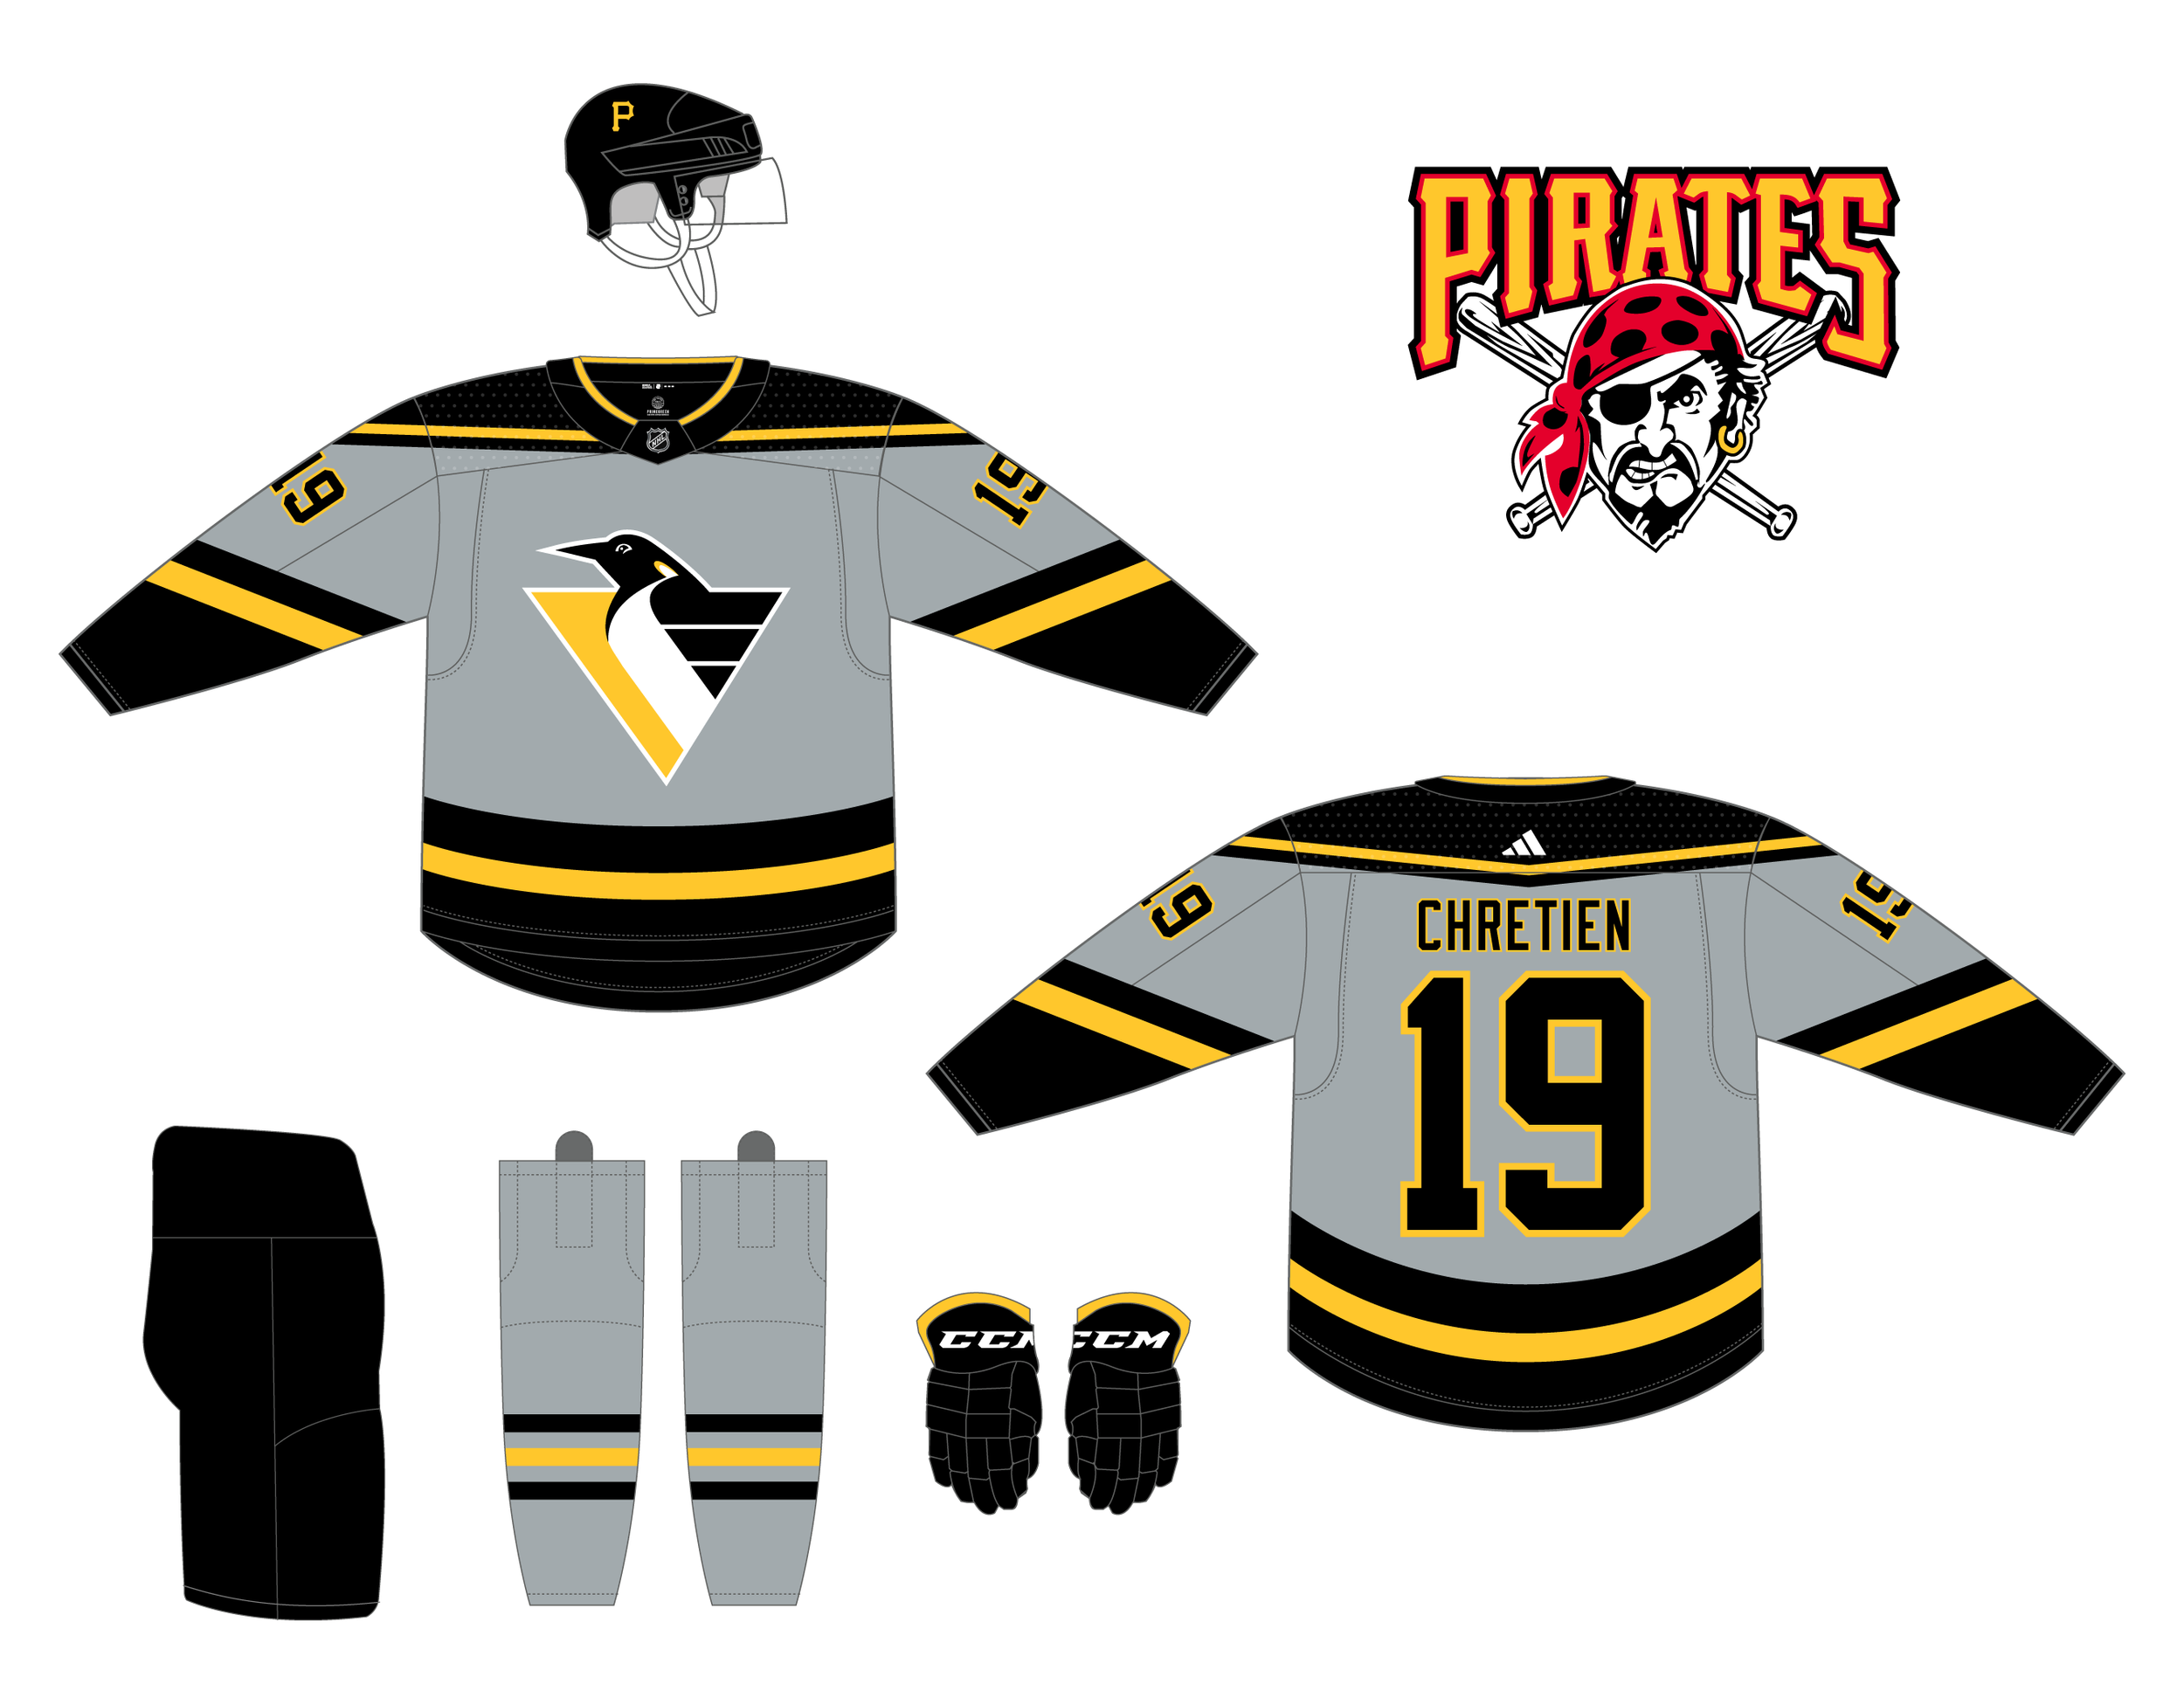 pittsburgh penguins jersey concepts